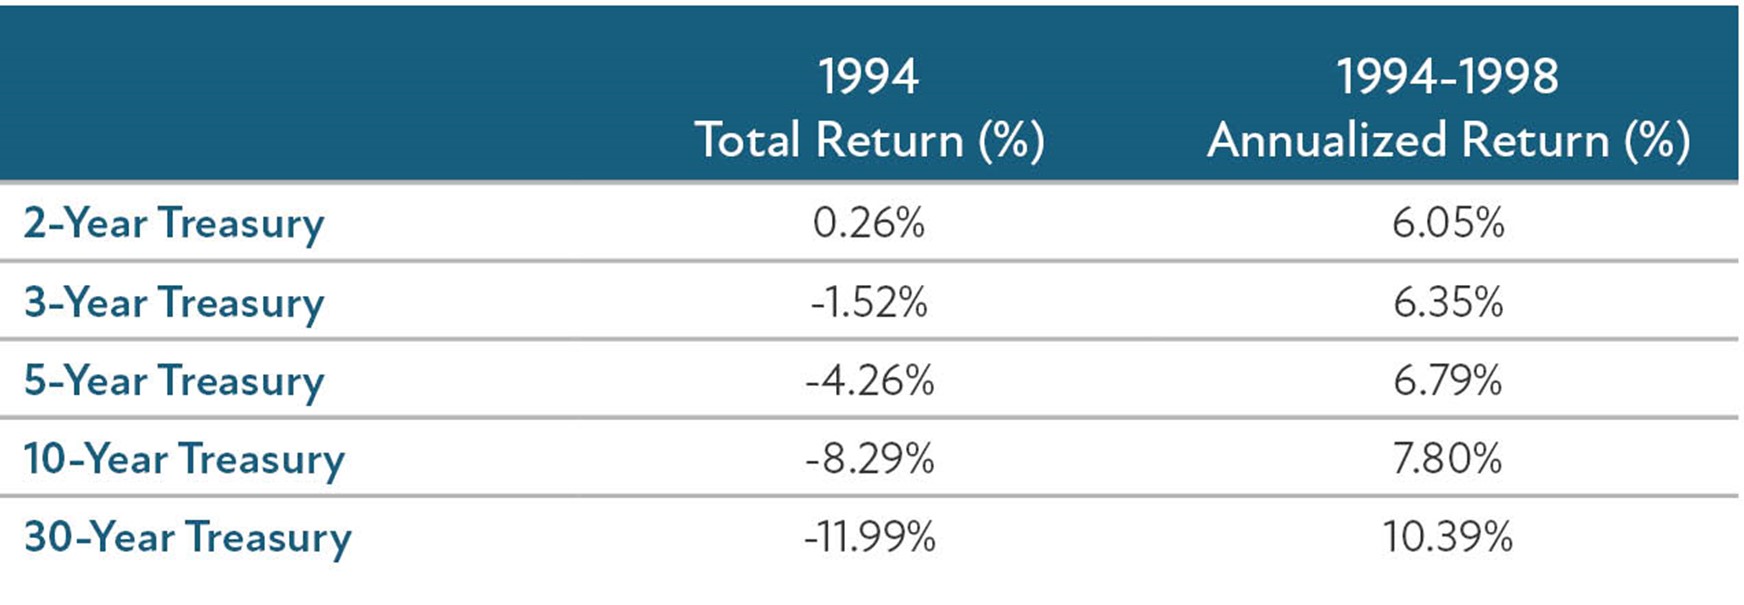 This chart shows 2-year, 3-year, 5-year, 10-year and 30-year Treasury returns both in 1994 and annualized 1994-1998. The 1994 returns range between 0.26% and -11.99%. The 1994-1998 annualized returns range between 6.05% and 10.39%.